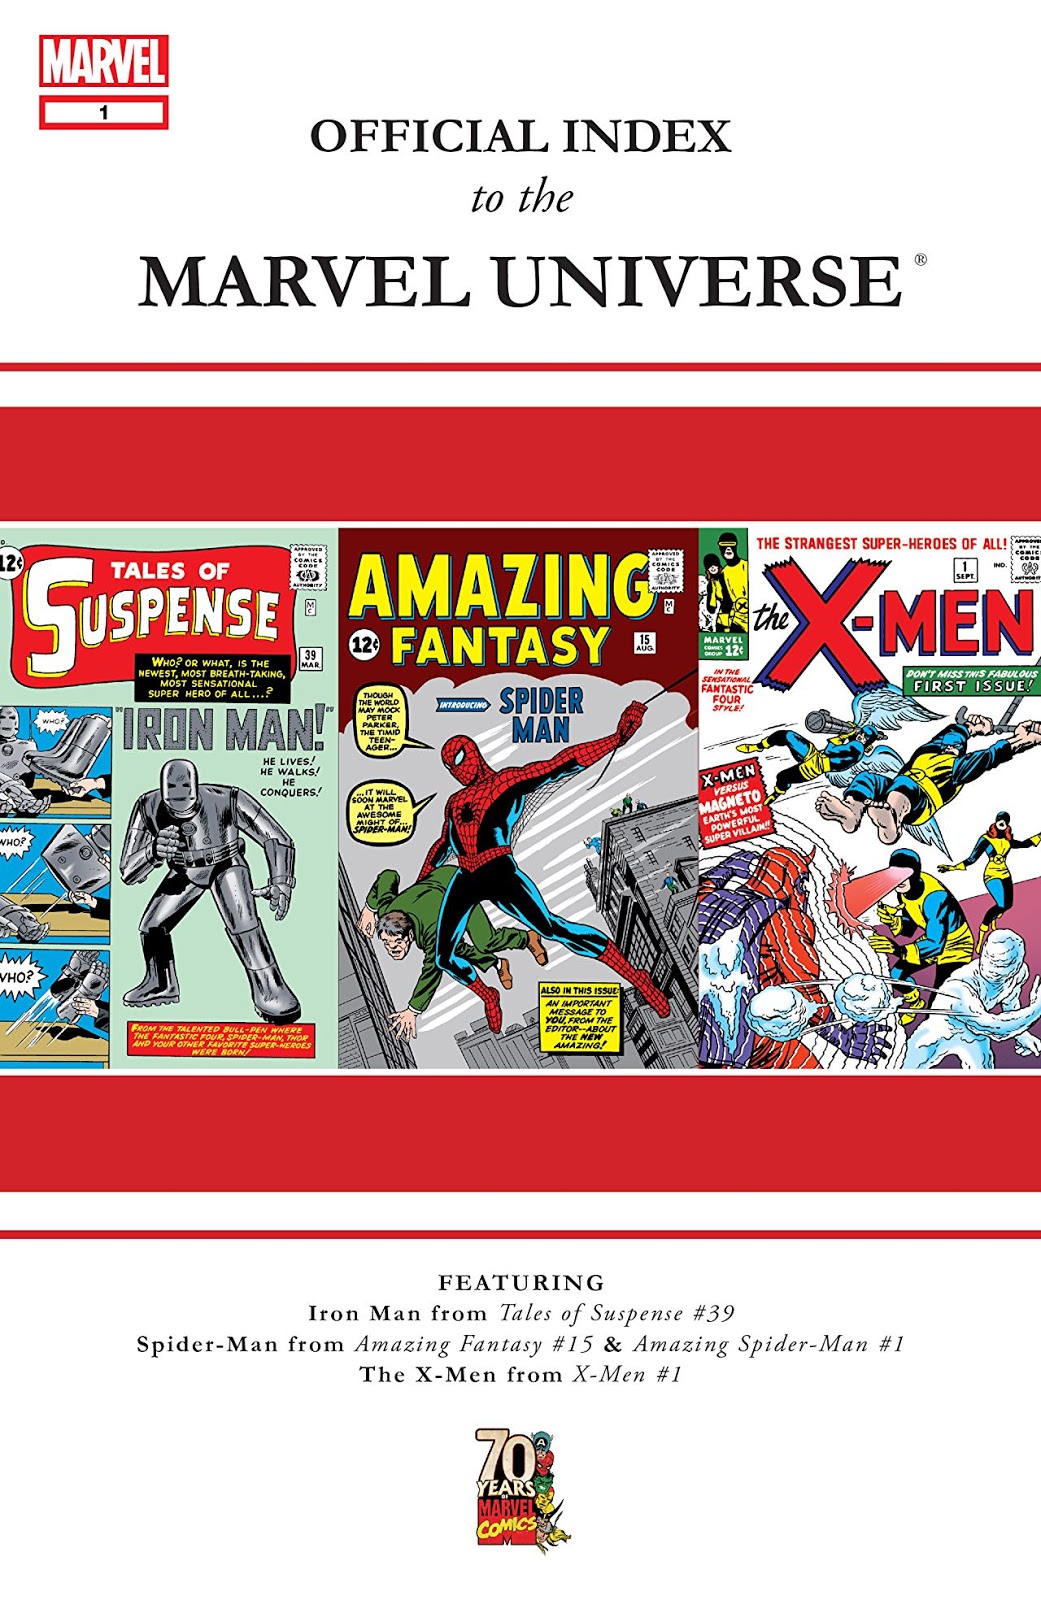 link marvel to comixology